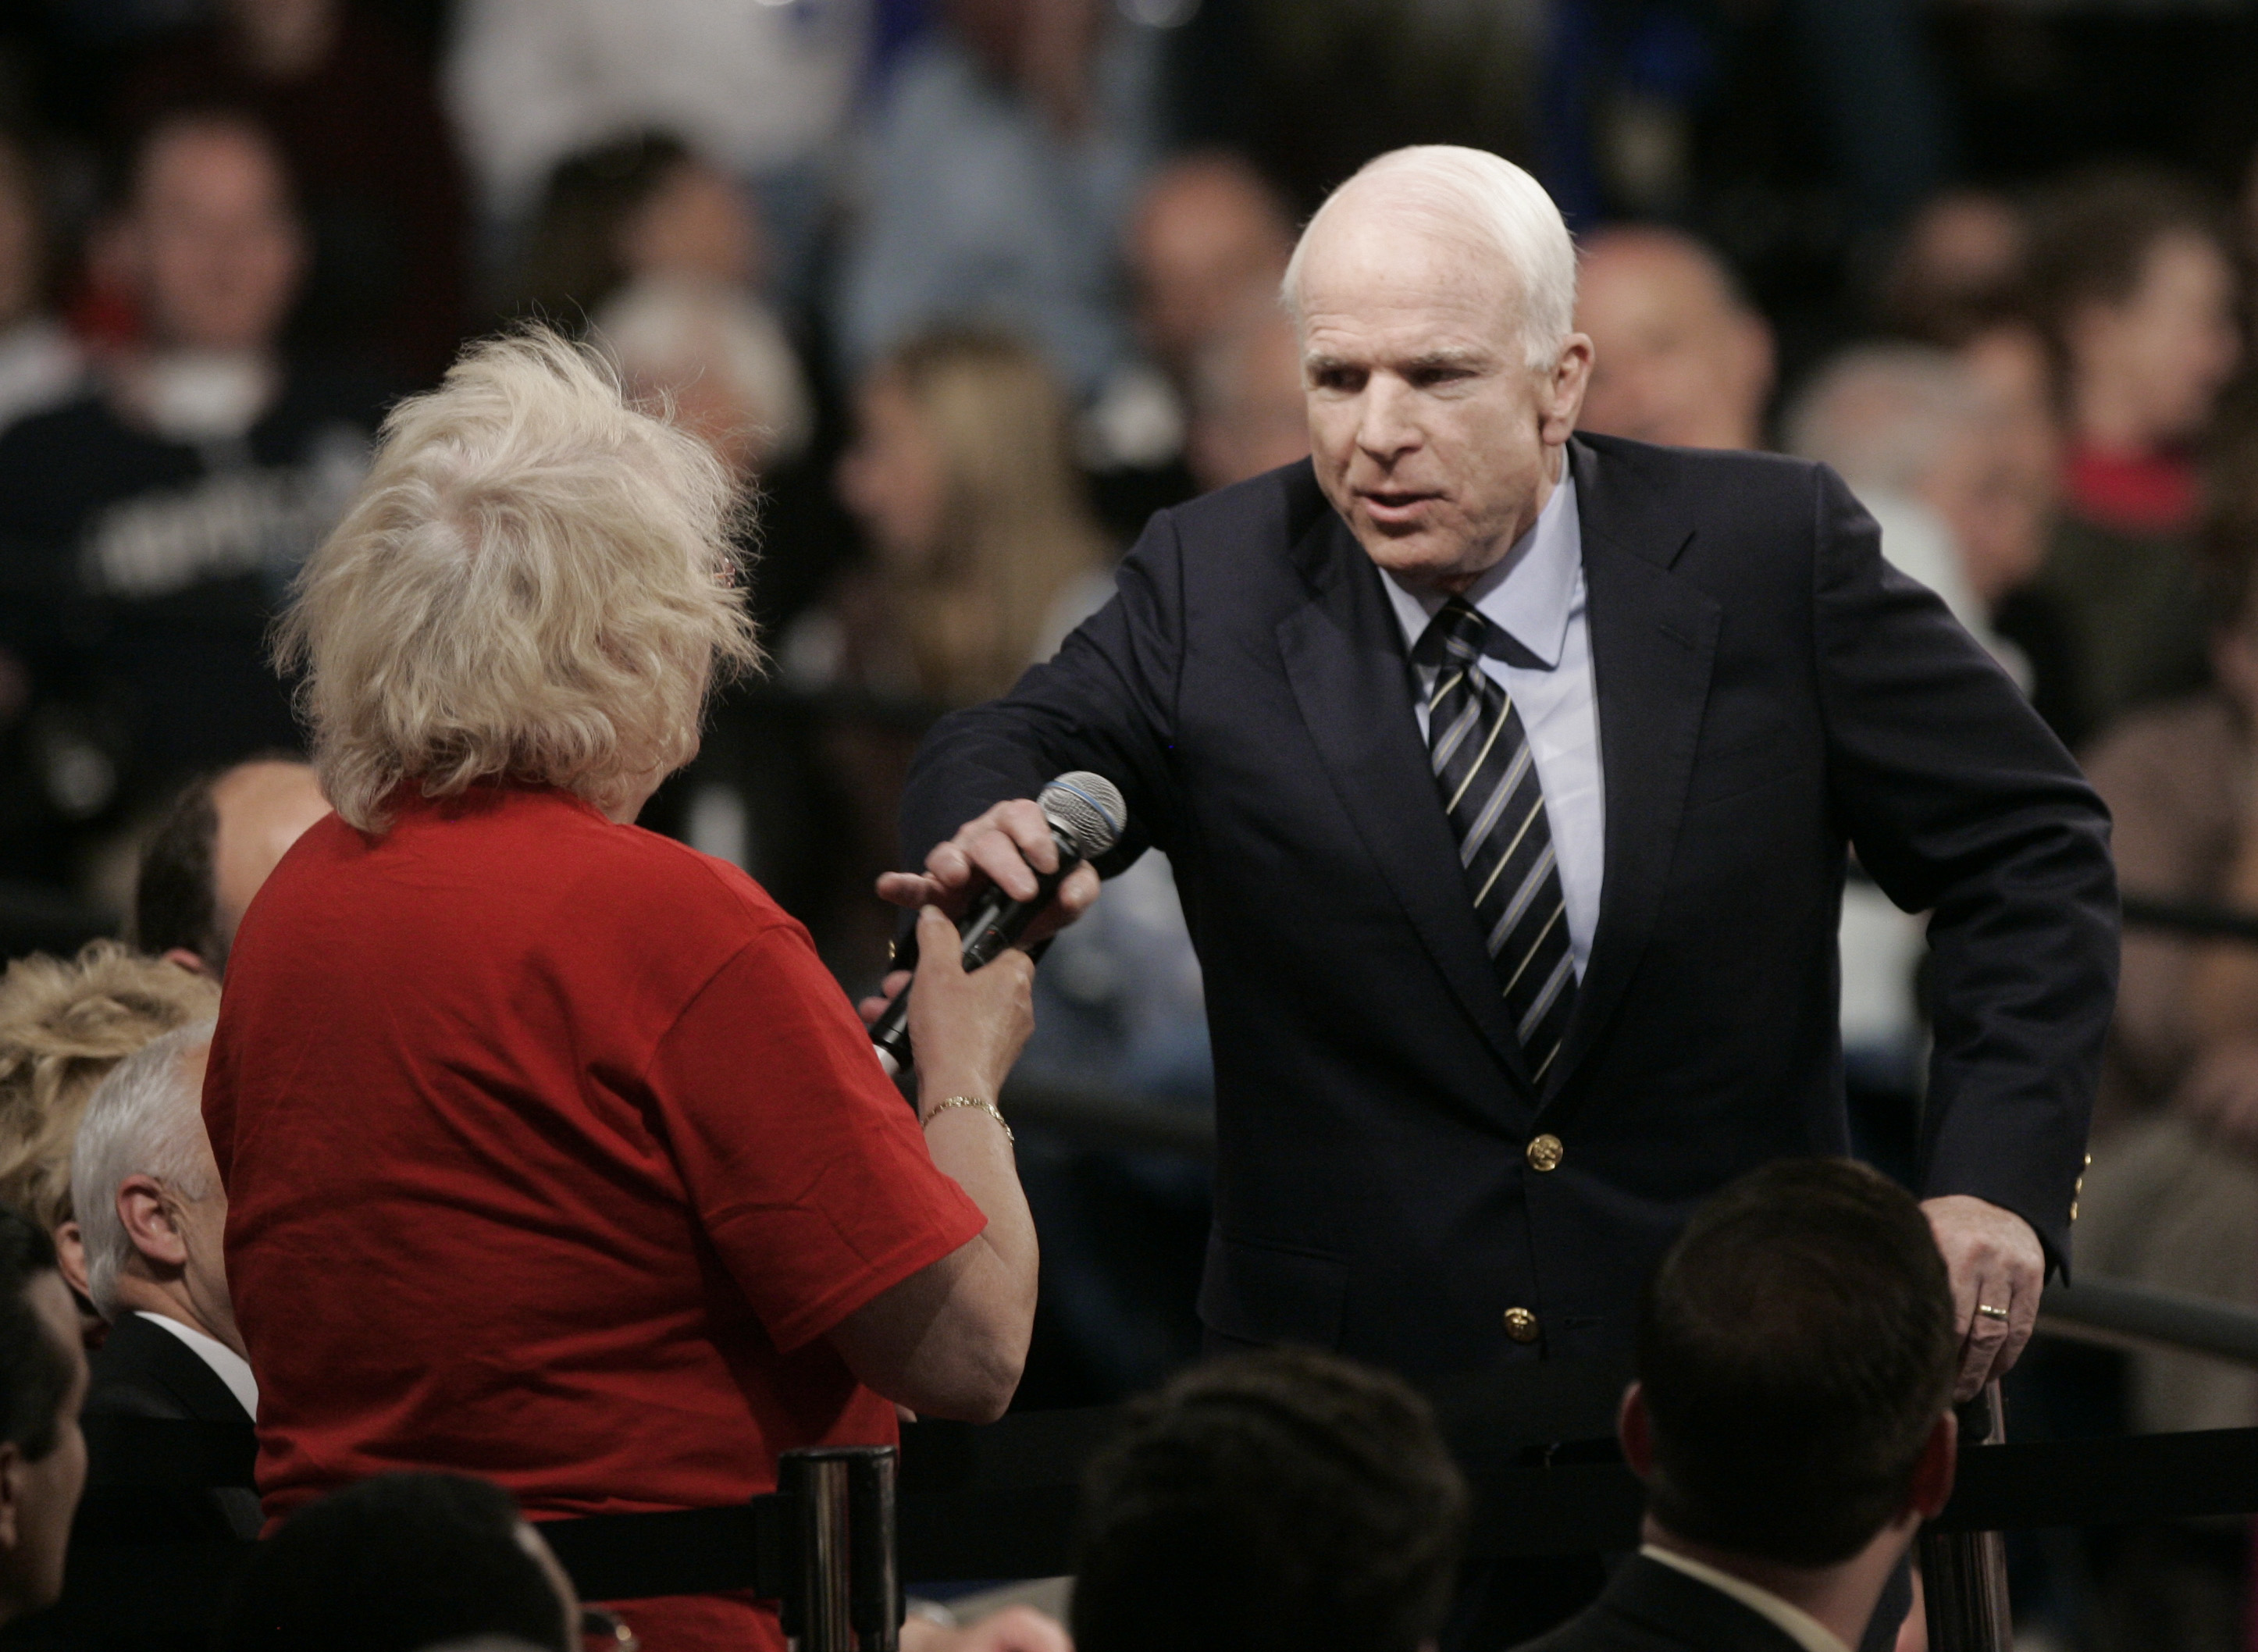 Republican presidential candidate Sen. John McCain, R-Ariz., right, takes back the microphone from Gayle Quinnell who said she read about Sen. Barack Obama and "that he was an Arab," during a question and answer time at a town hall meeting at Lakeville South High School Friday, Oct. 10, 2008 in Lakeville, Minn. (AP Photo/Jim Mone)